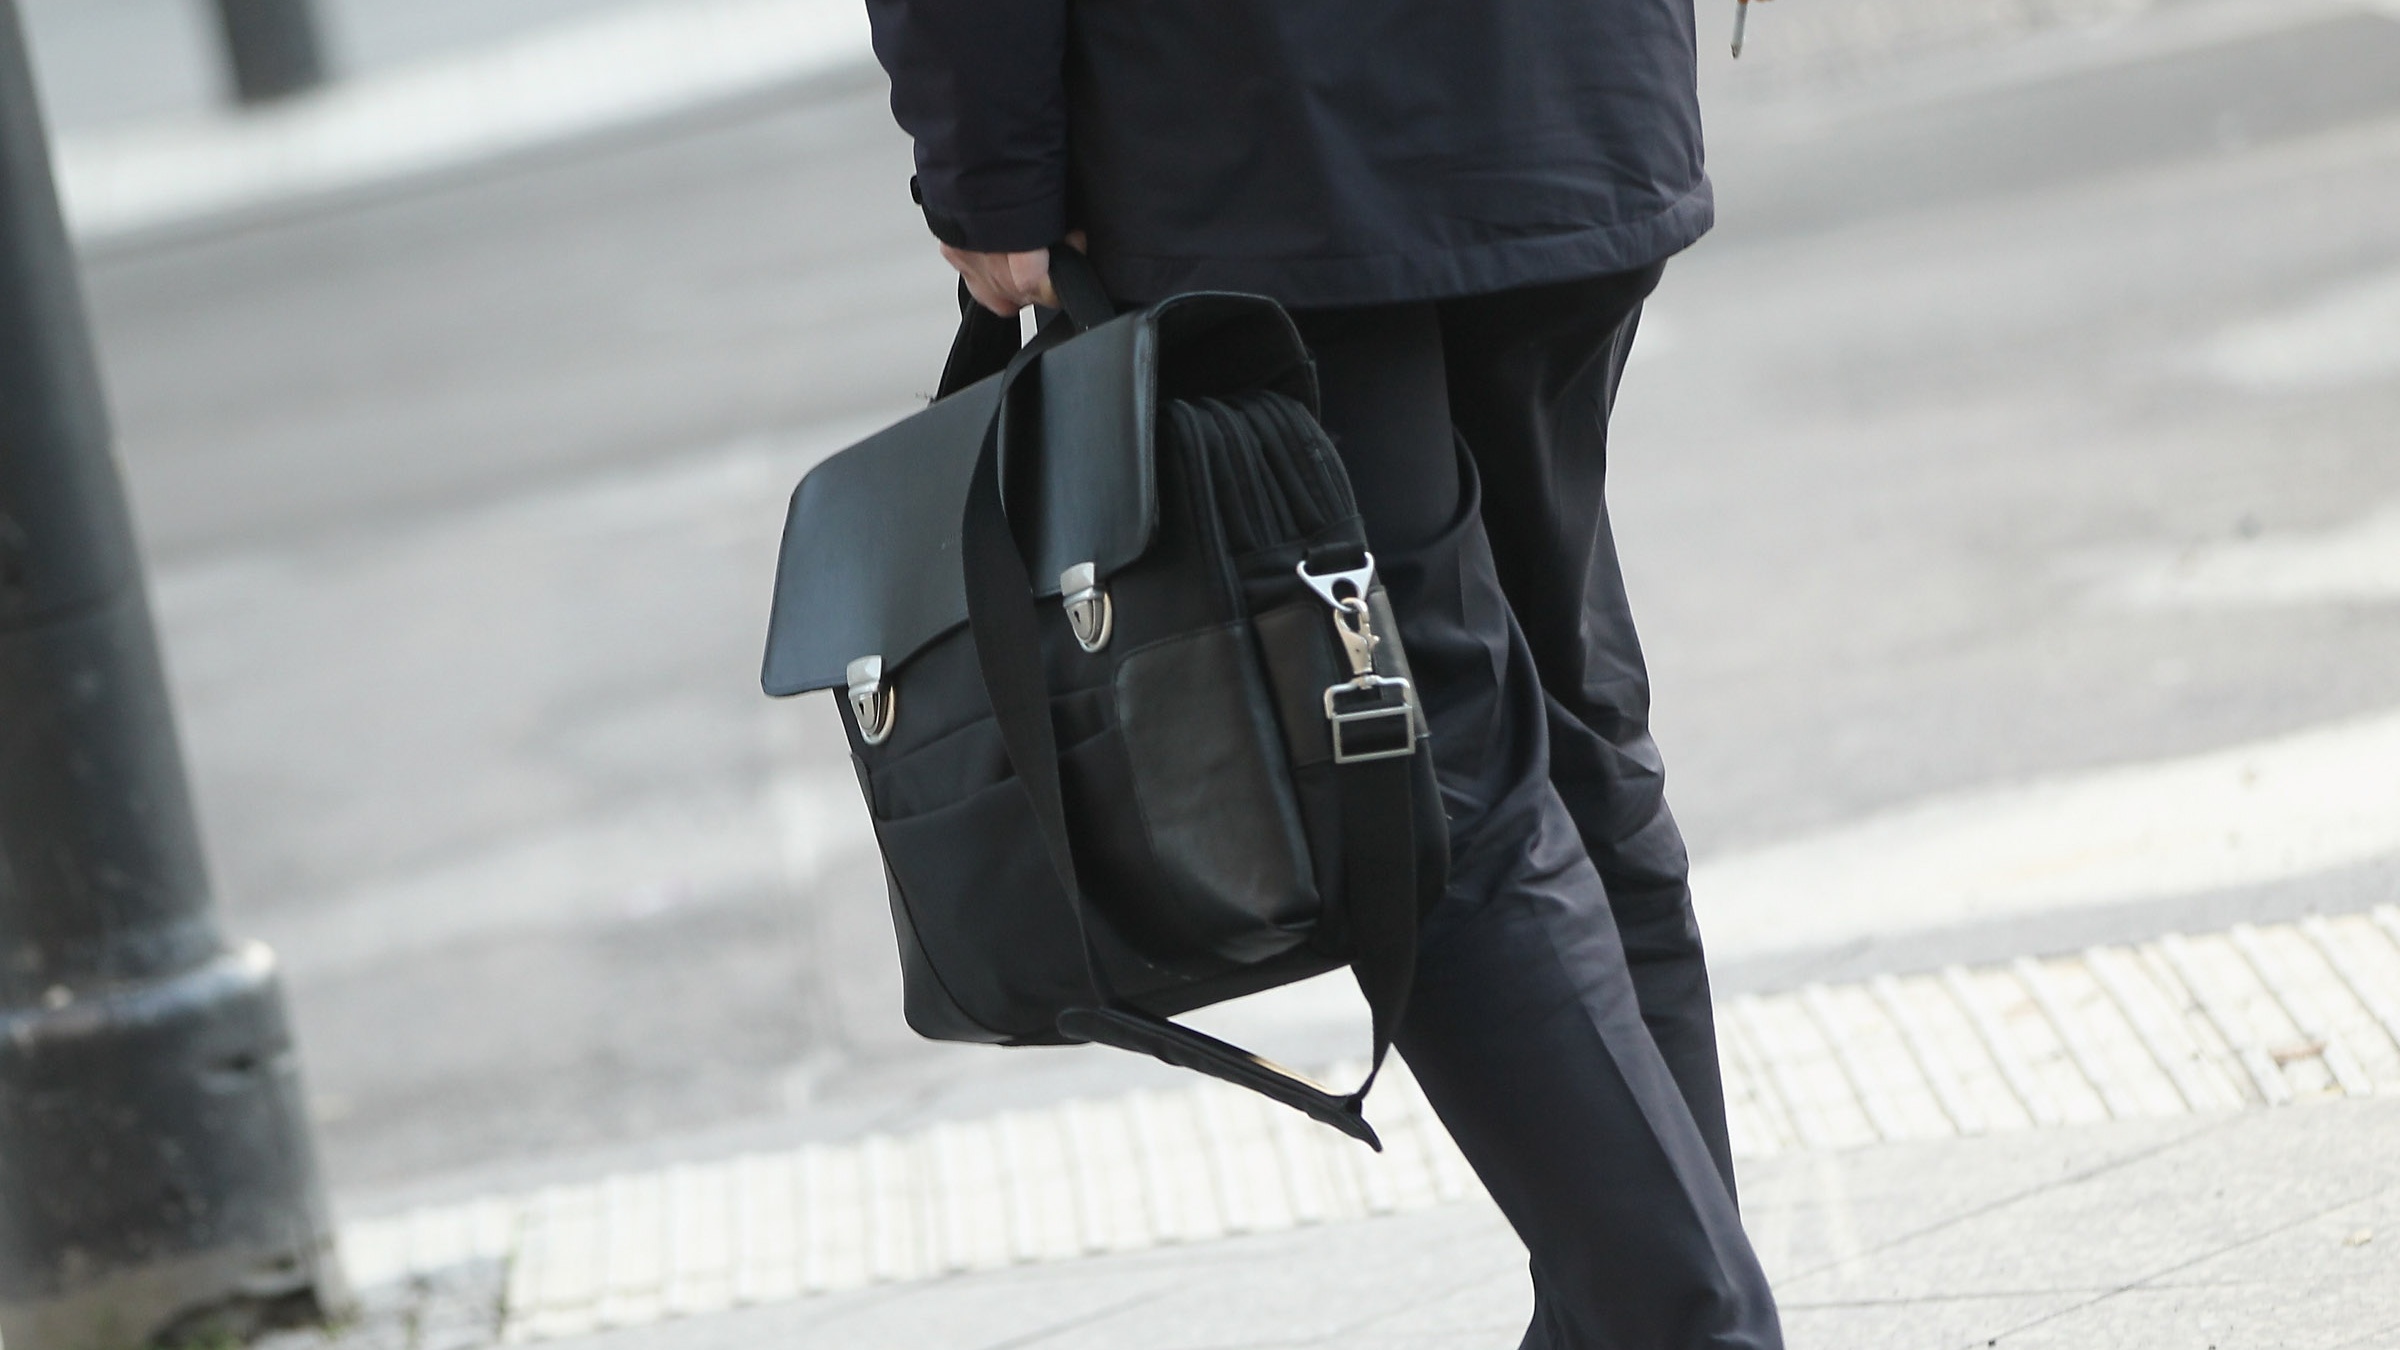 A man carrying a briefcase